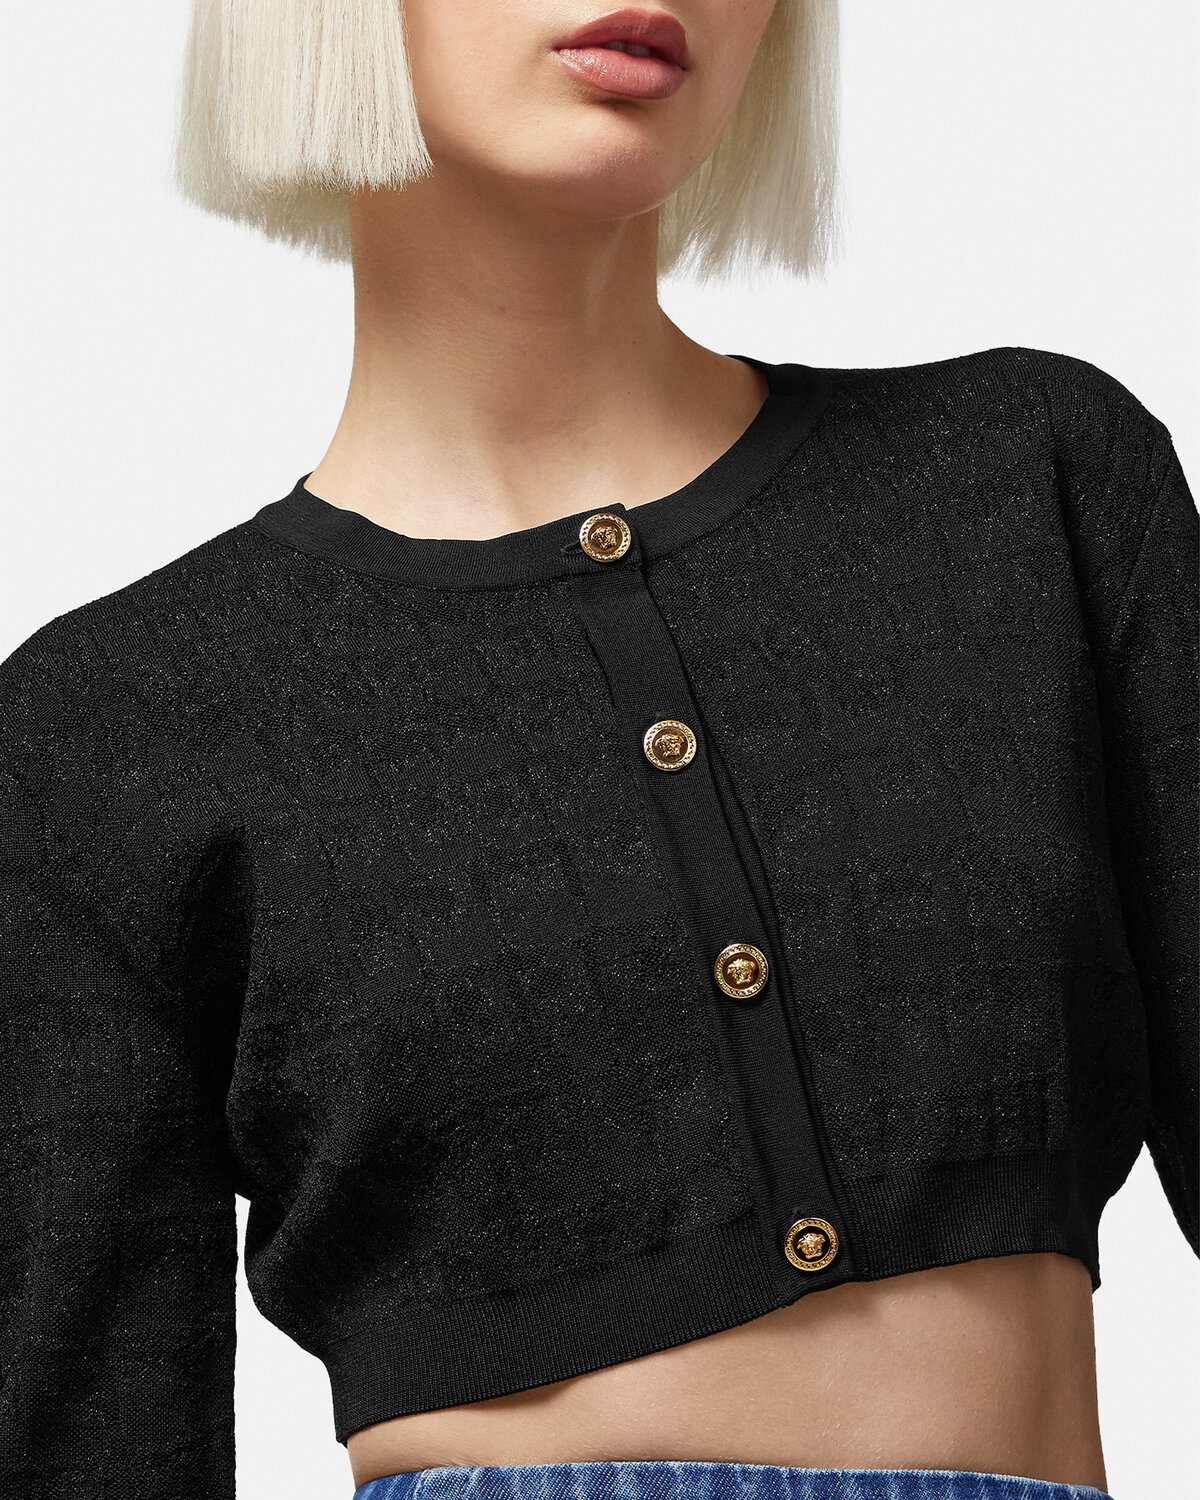 Black Greca-jacquard knitted cropped top, Versace